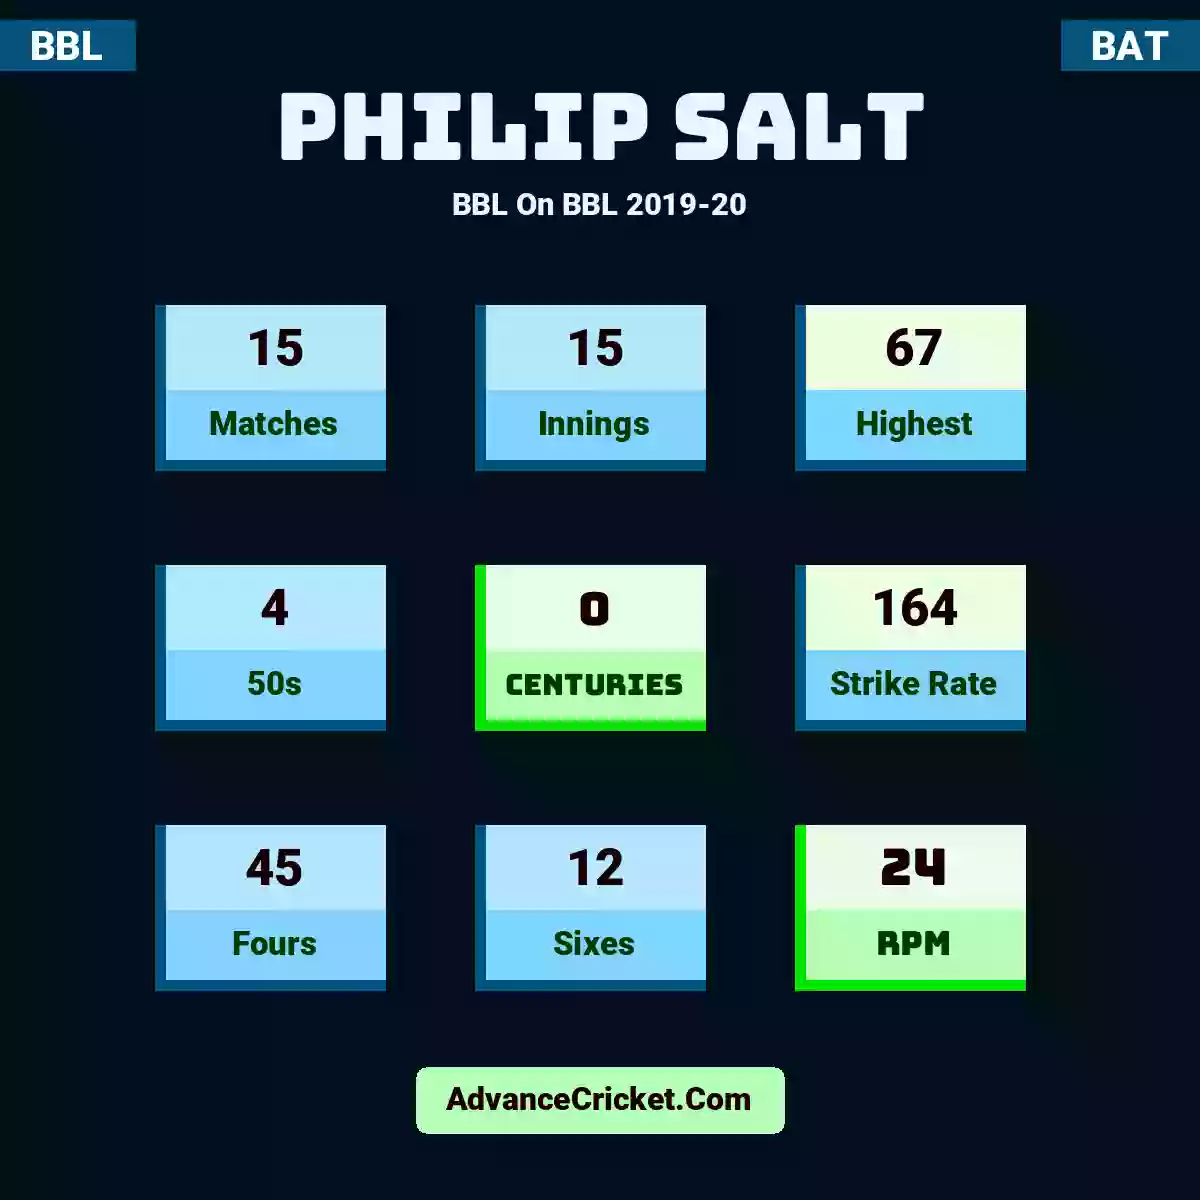 Philip Salt BBL  On BBL 2019-20, Philip Salt played 15 matches, scored 67 runs as highest, 4 half-centuries, and 0 centuries, with a strike rate of 164. P.Salt hit 45 fours and 12 sixes, with an RPM of 24.